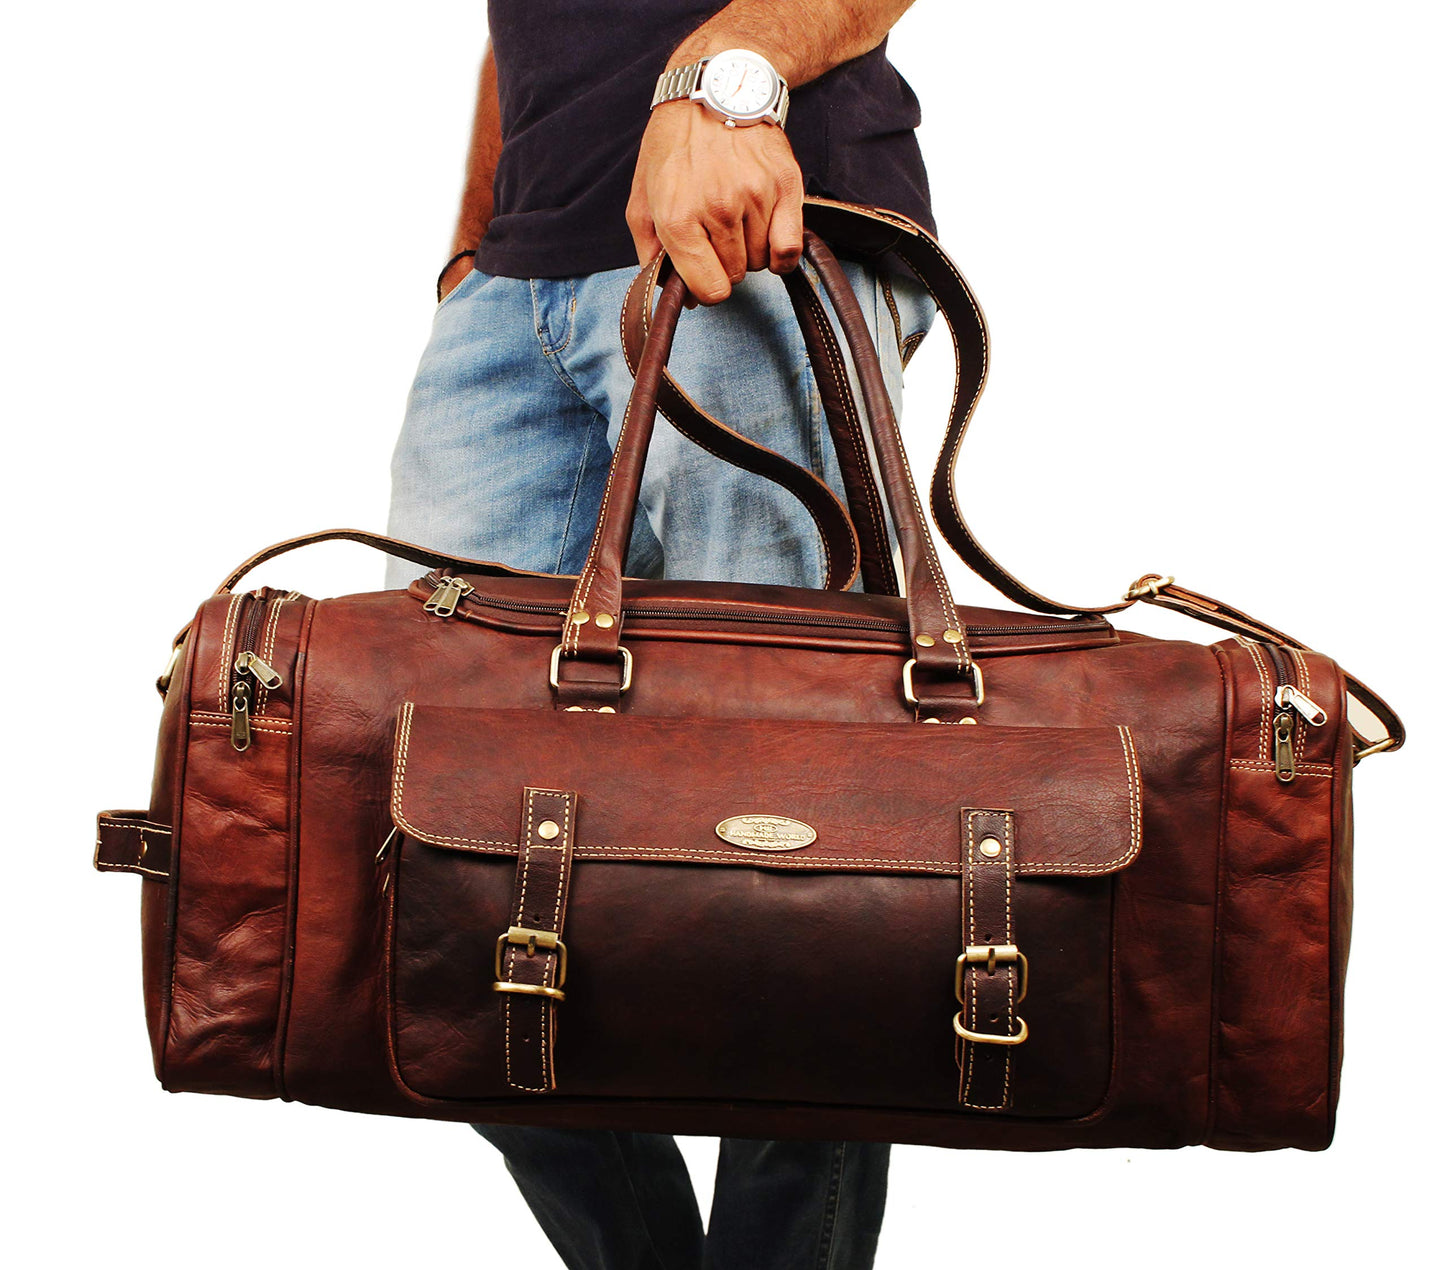 Hulsh Leather Duffle Bags for Men 24 Inch | Vintage Brown Genuine Leather Travel Bags for Mens Overnight Weekend | Best Full Grain Leather Luggage Duffel Carry On Weekender Sports Gym Bag for Women